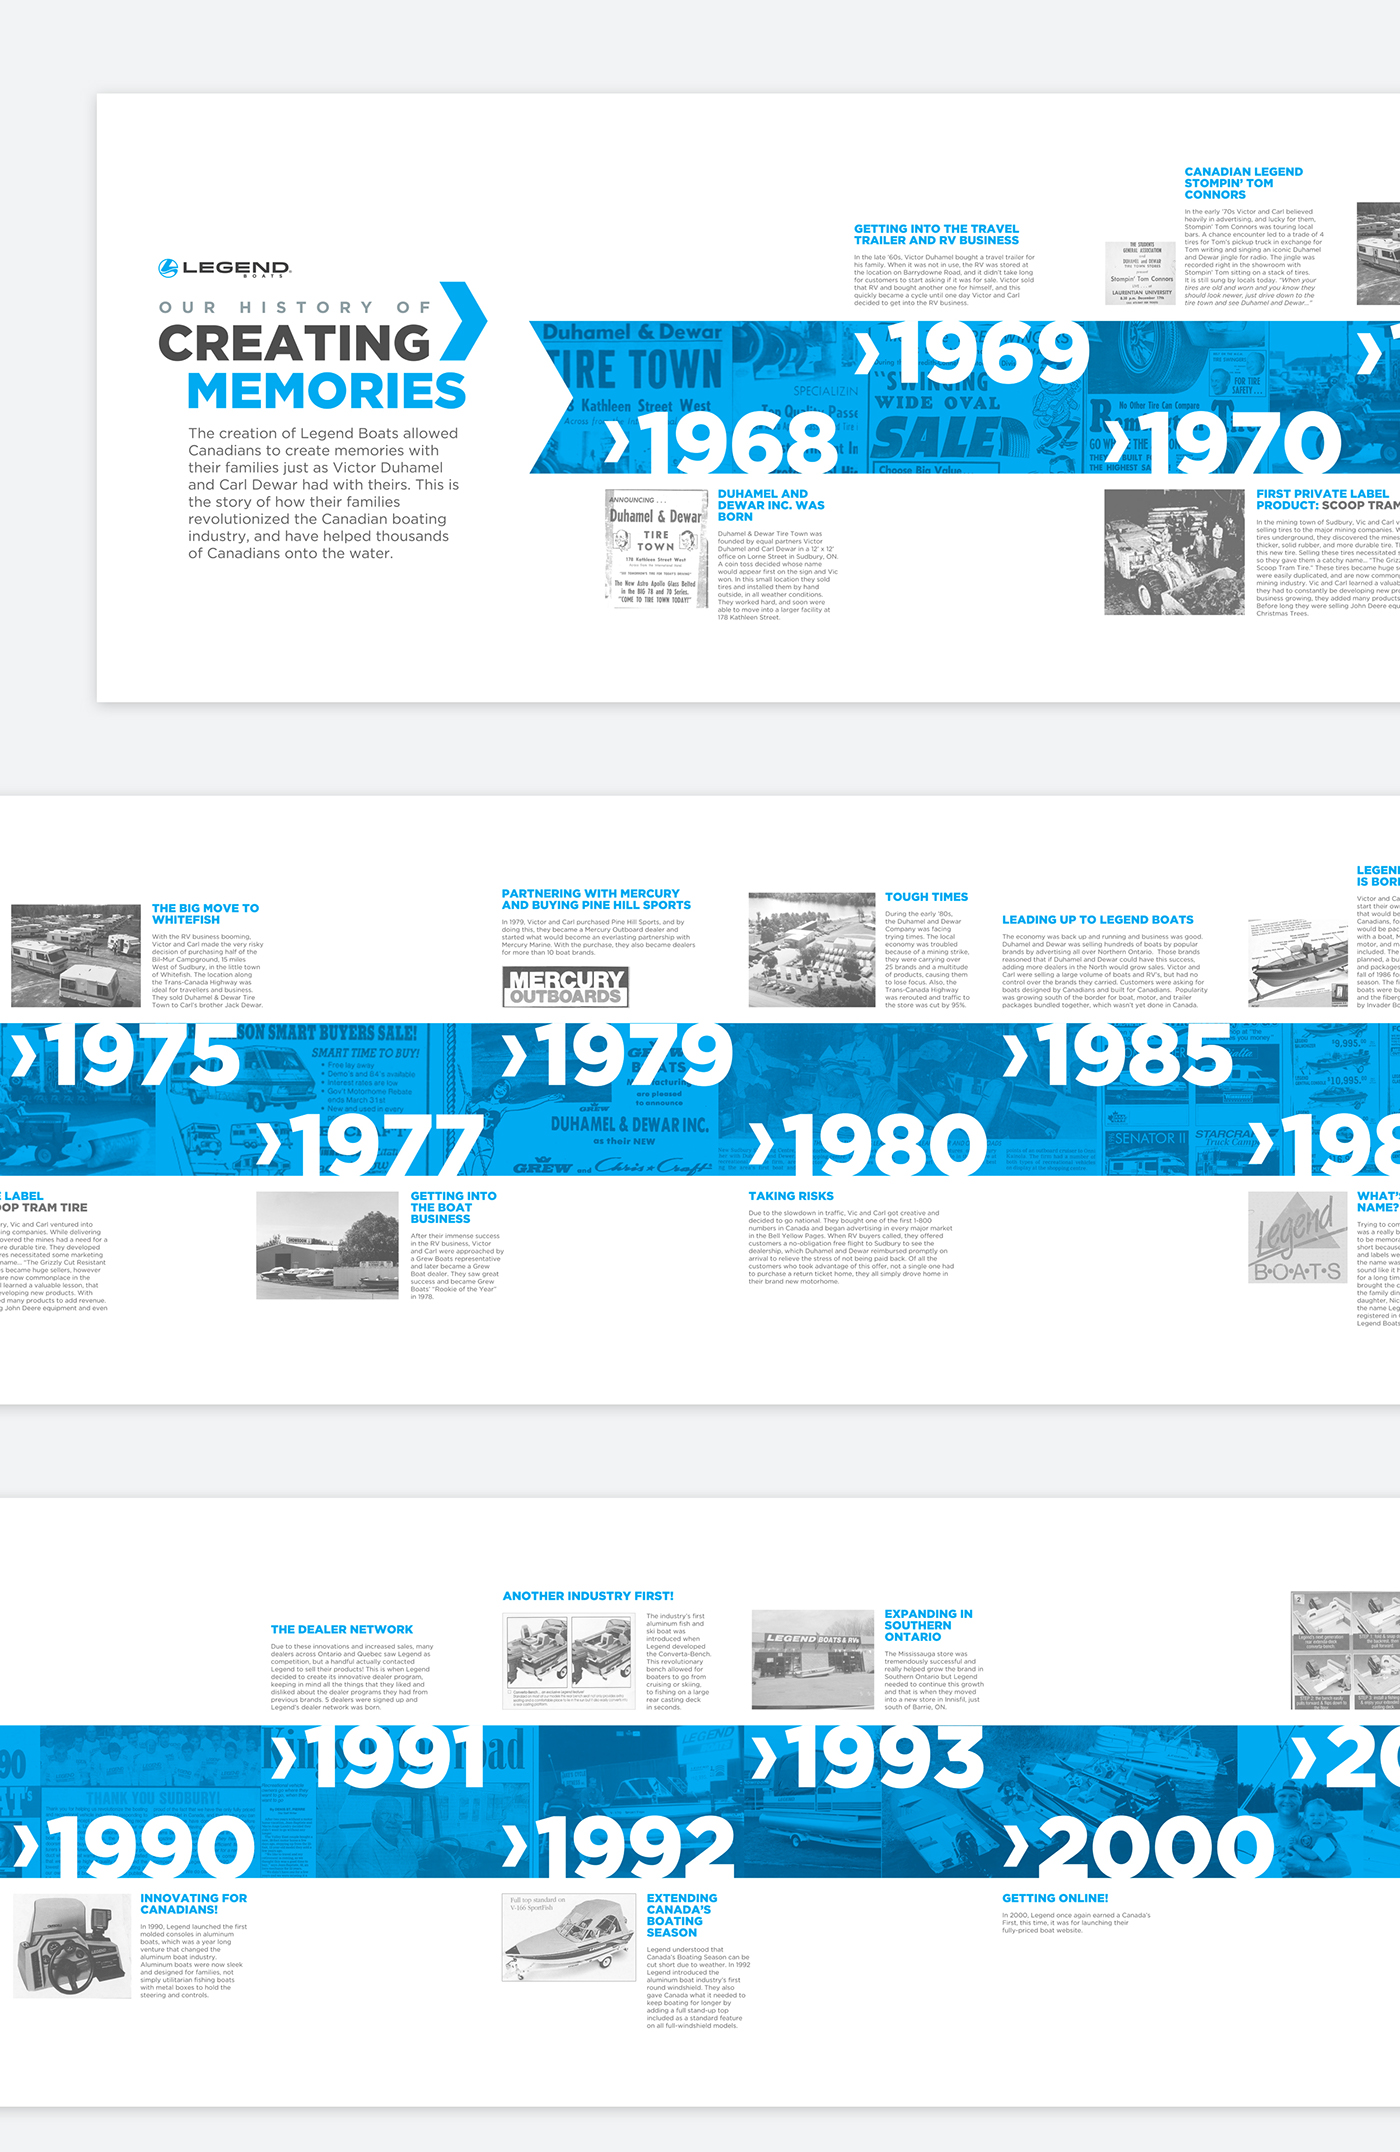 timeline history graphic design wall wall graphic history wall timeline design legend boats graphic design 